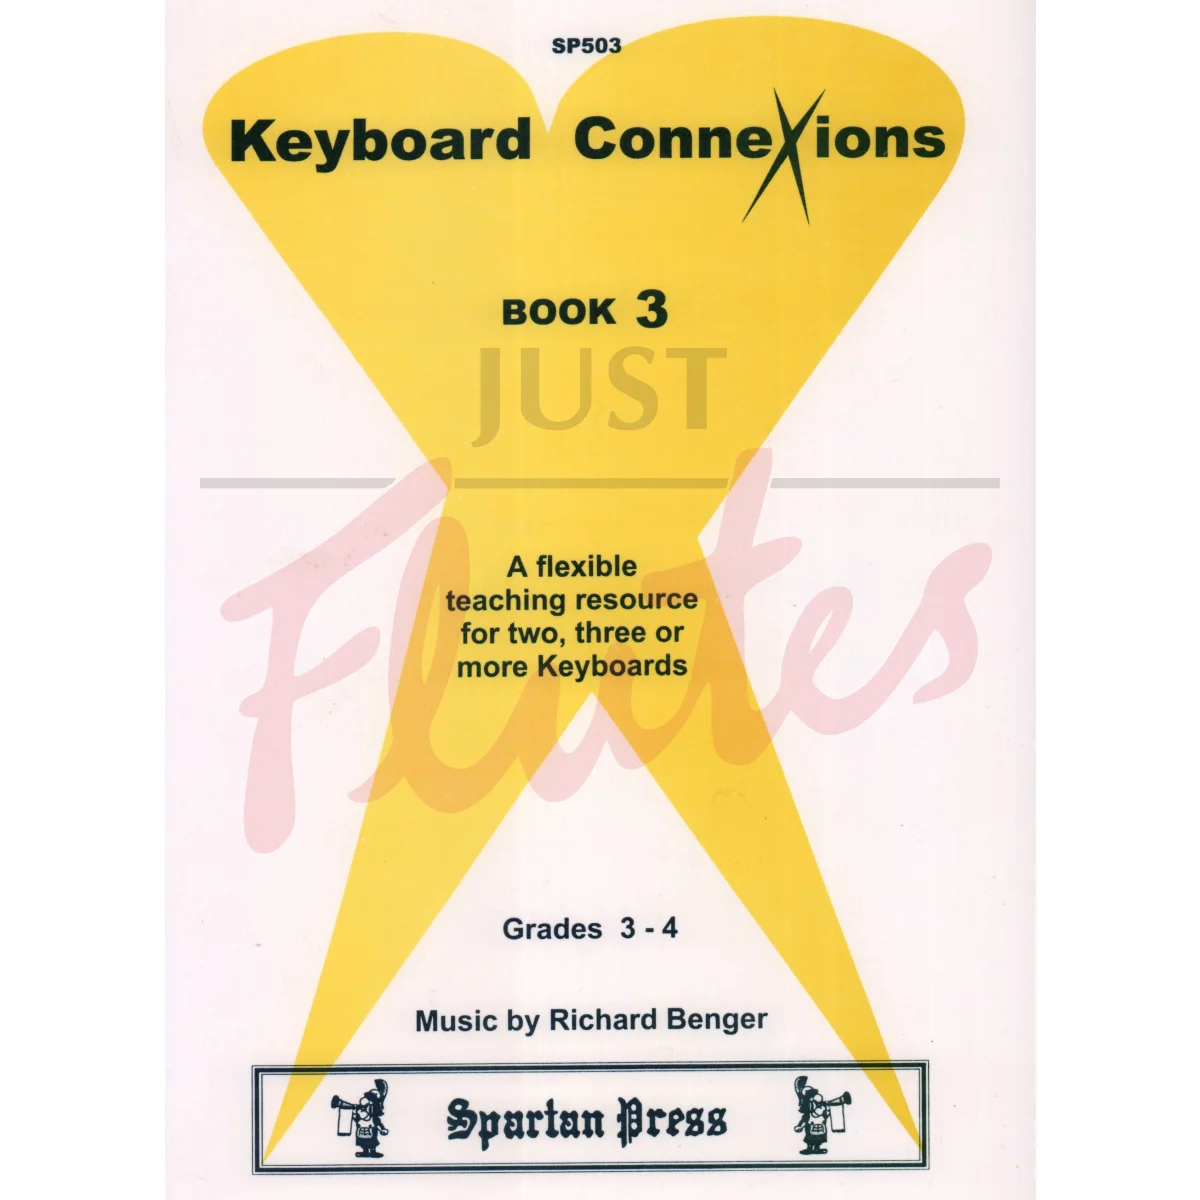 Keyboard Connexions Book 3